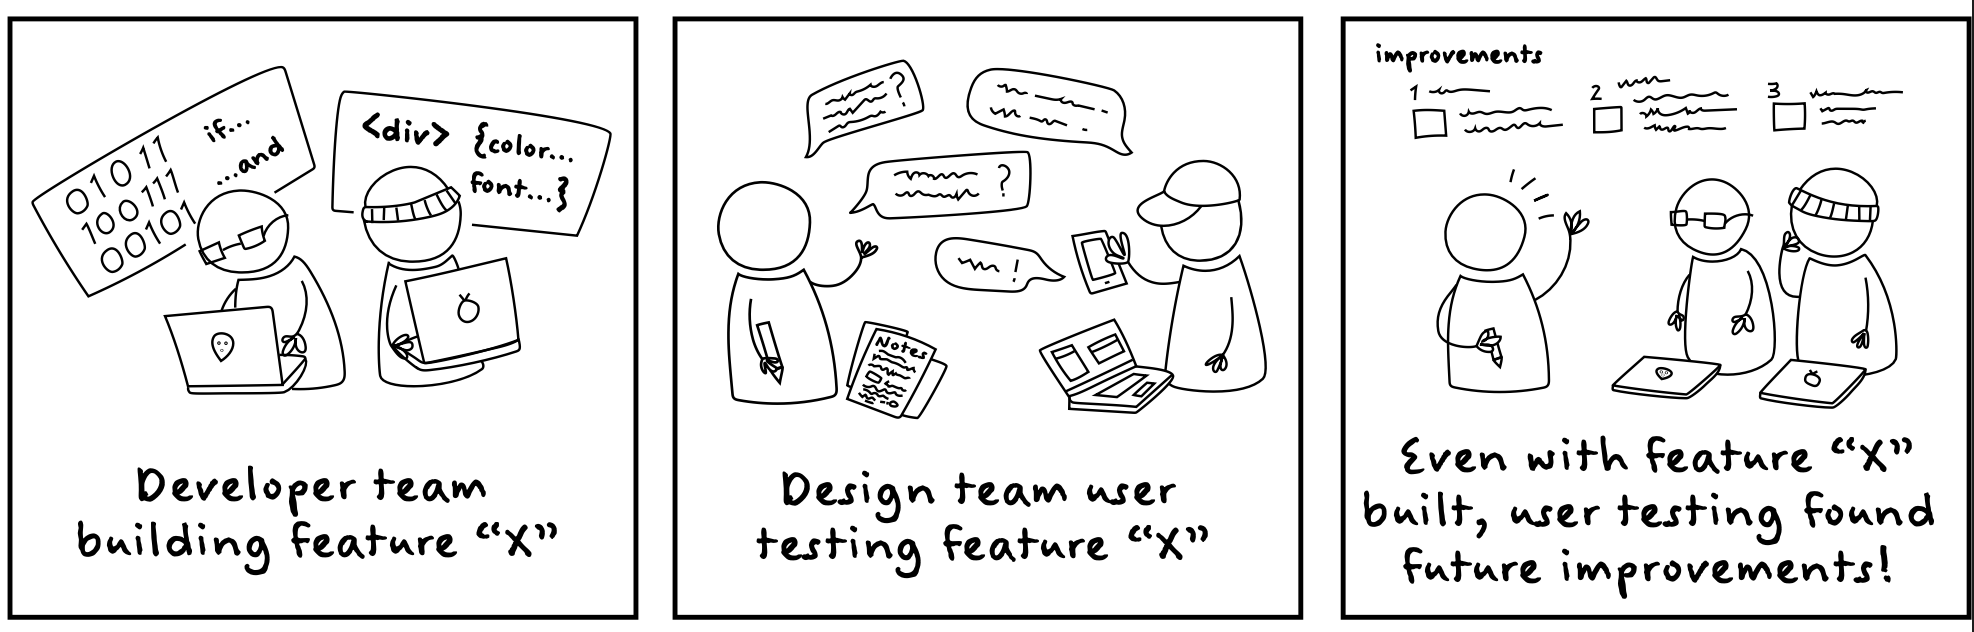 A short 3 panel comic about how development and design of a feature can be done at the same time and user insight can be used to make improvements rather than hold up development work 